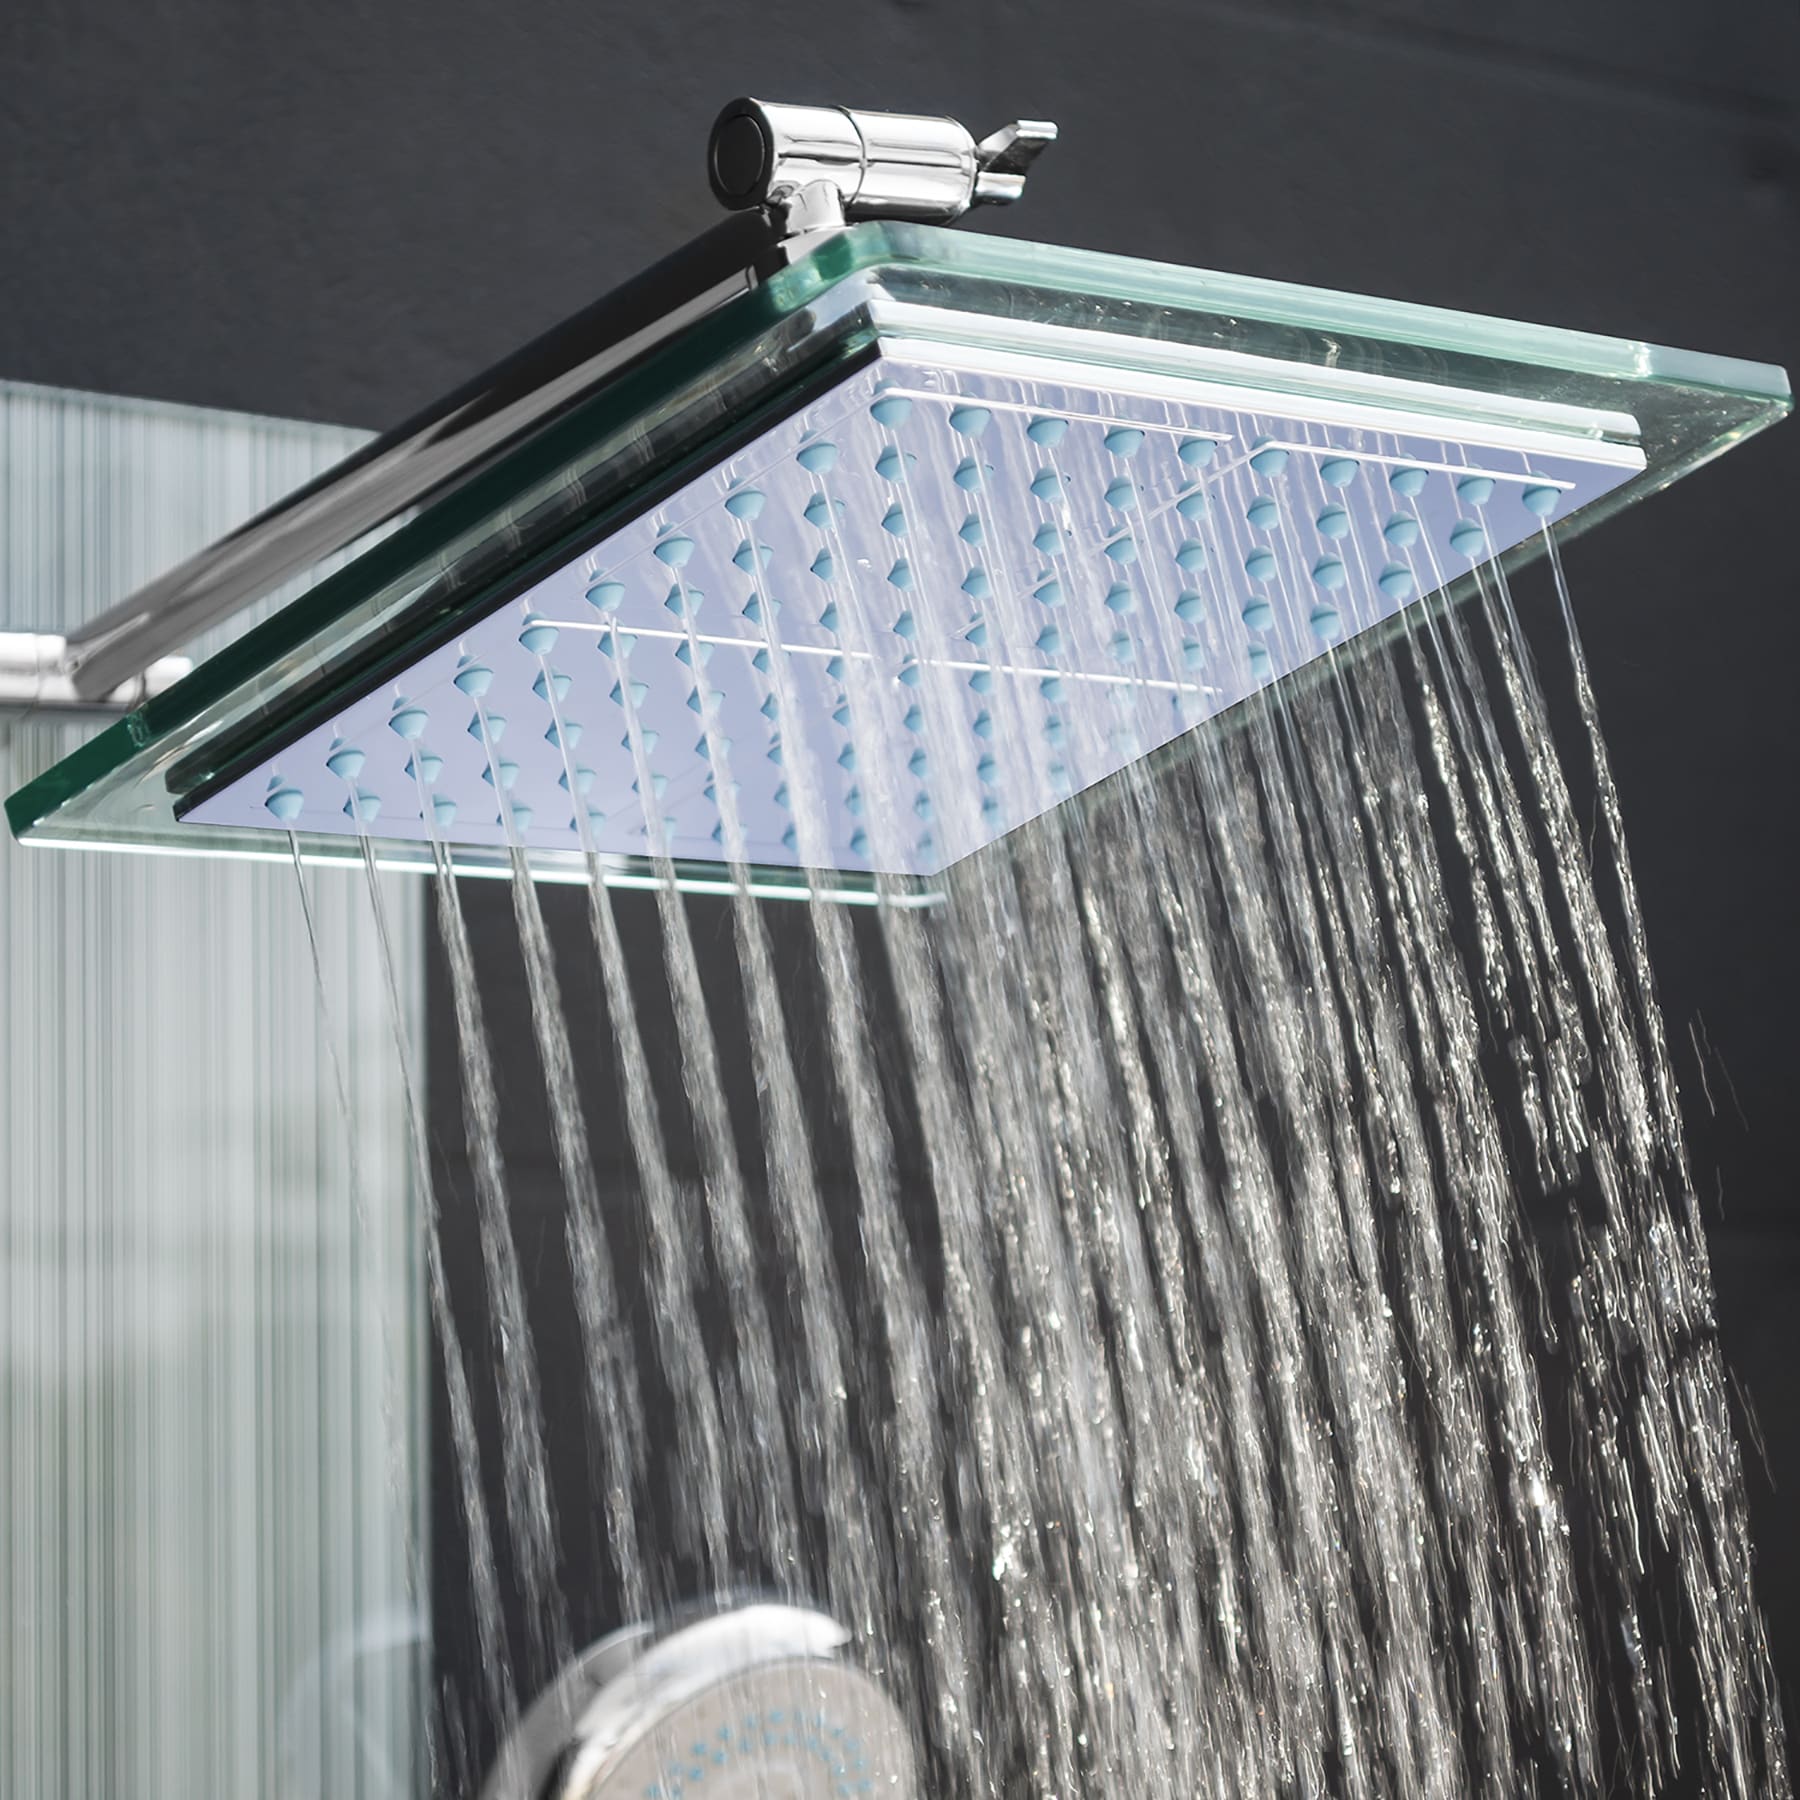 Details about   52" Stainless Steel Rainfall Showerhead Hot Water Panel Tower Multi Function Jet 